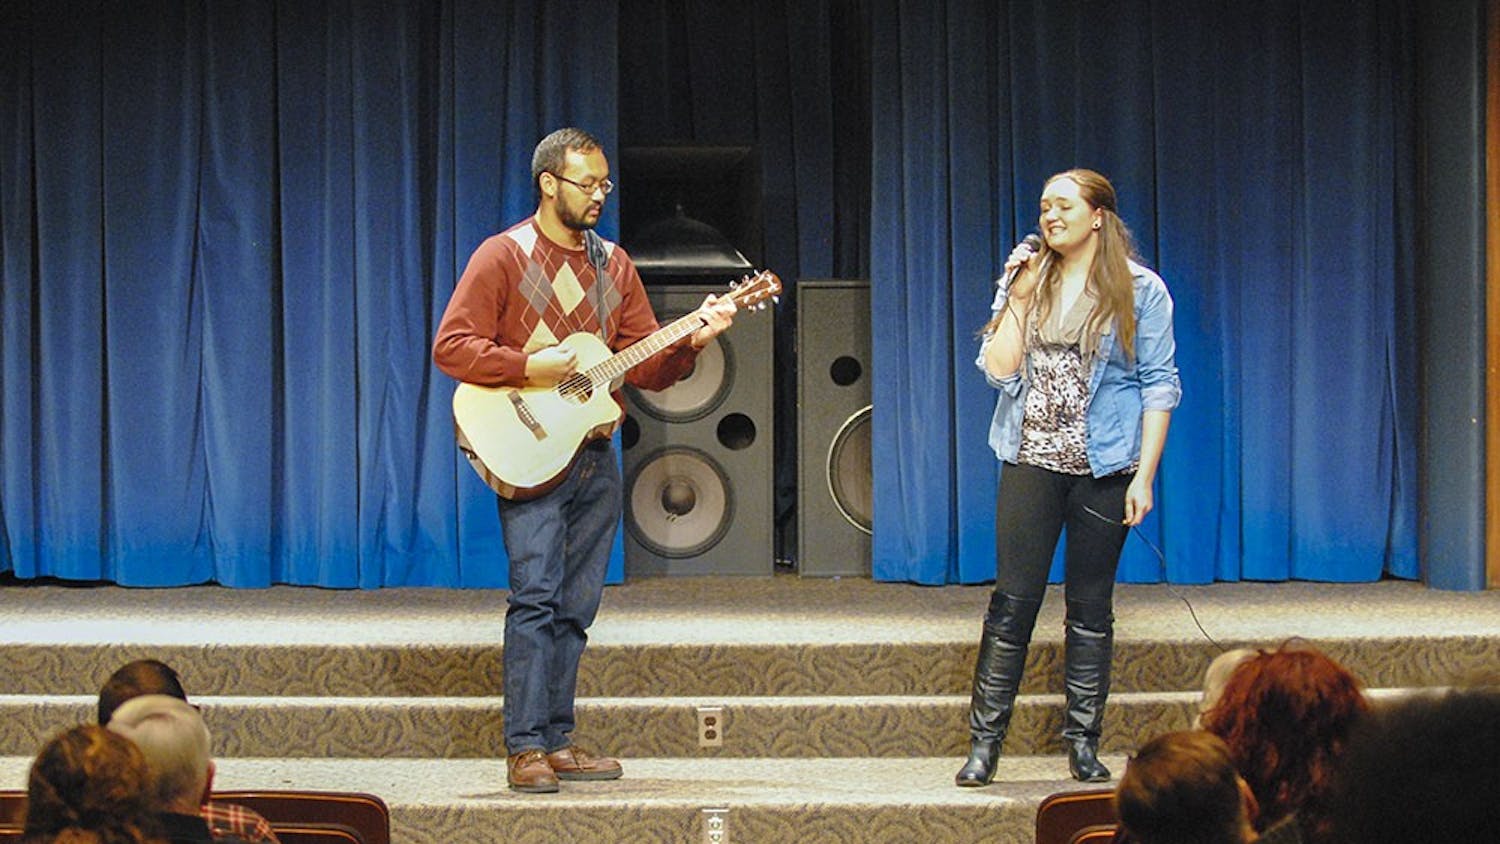 Emily sings “You and I” by Ingrid Michaelson at the School of Social Work’s talent show. After getting off stage, she said she hadn’t performed in front of people in years. 